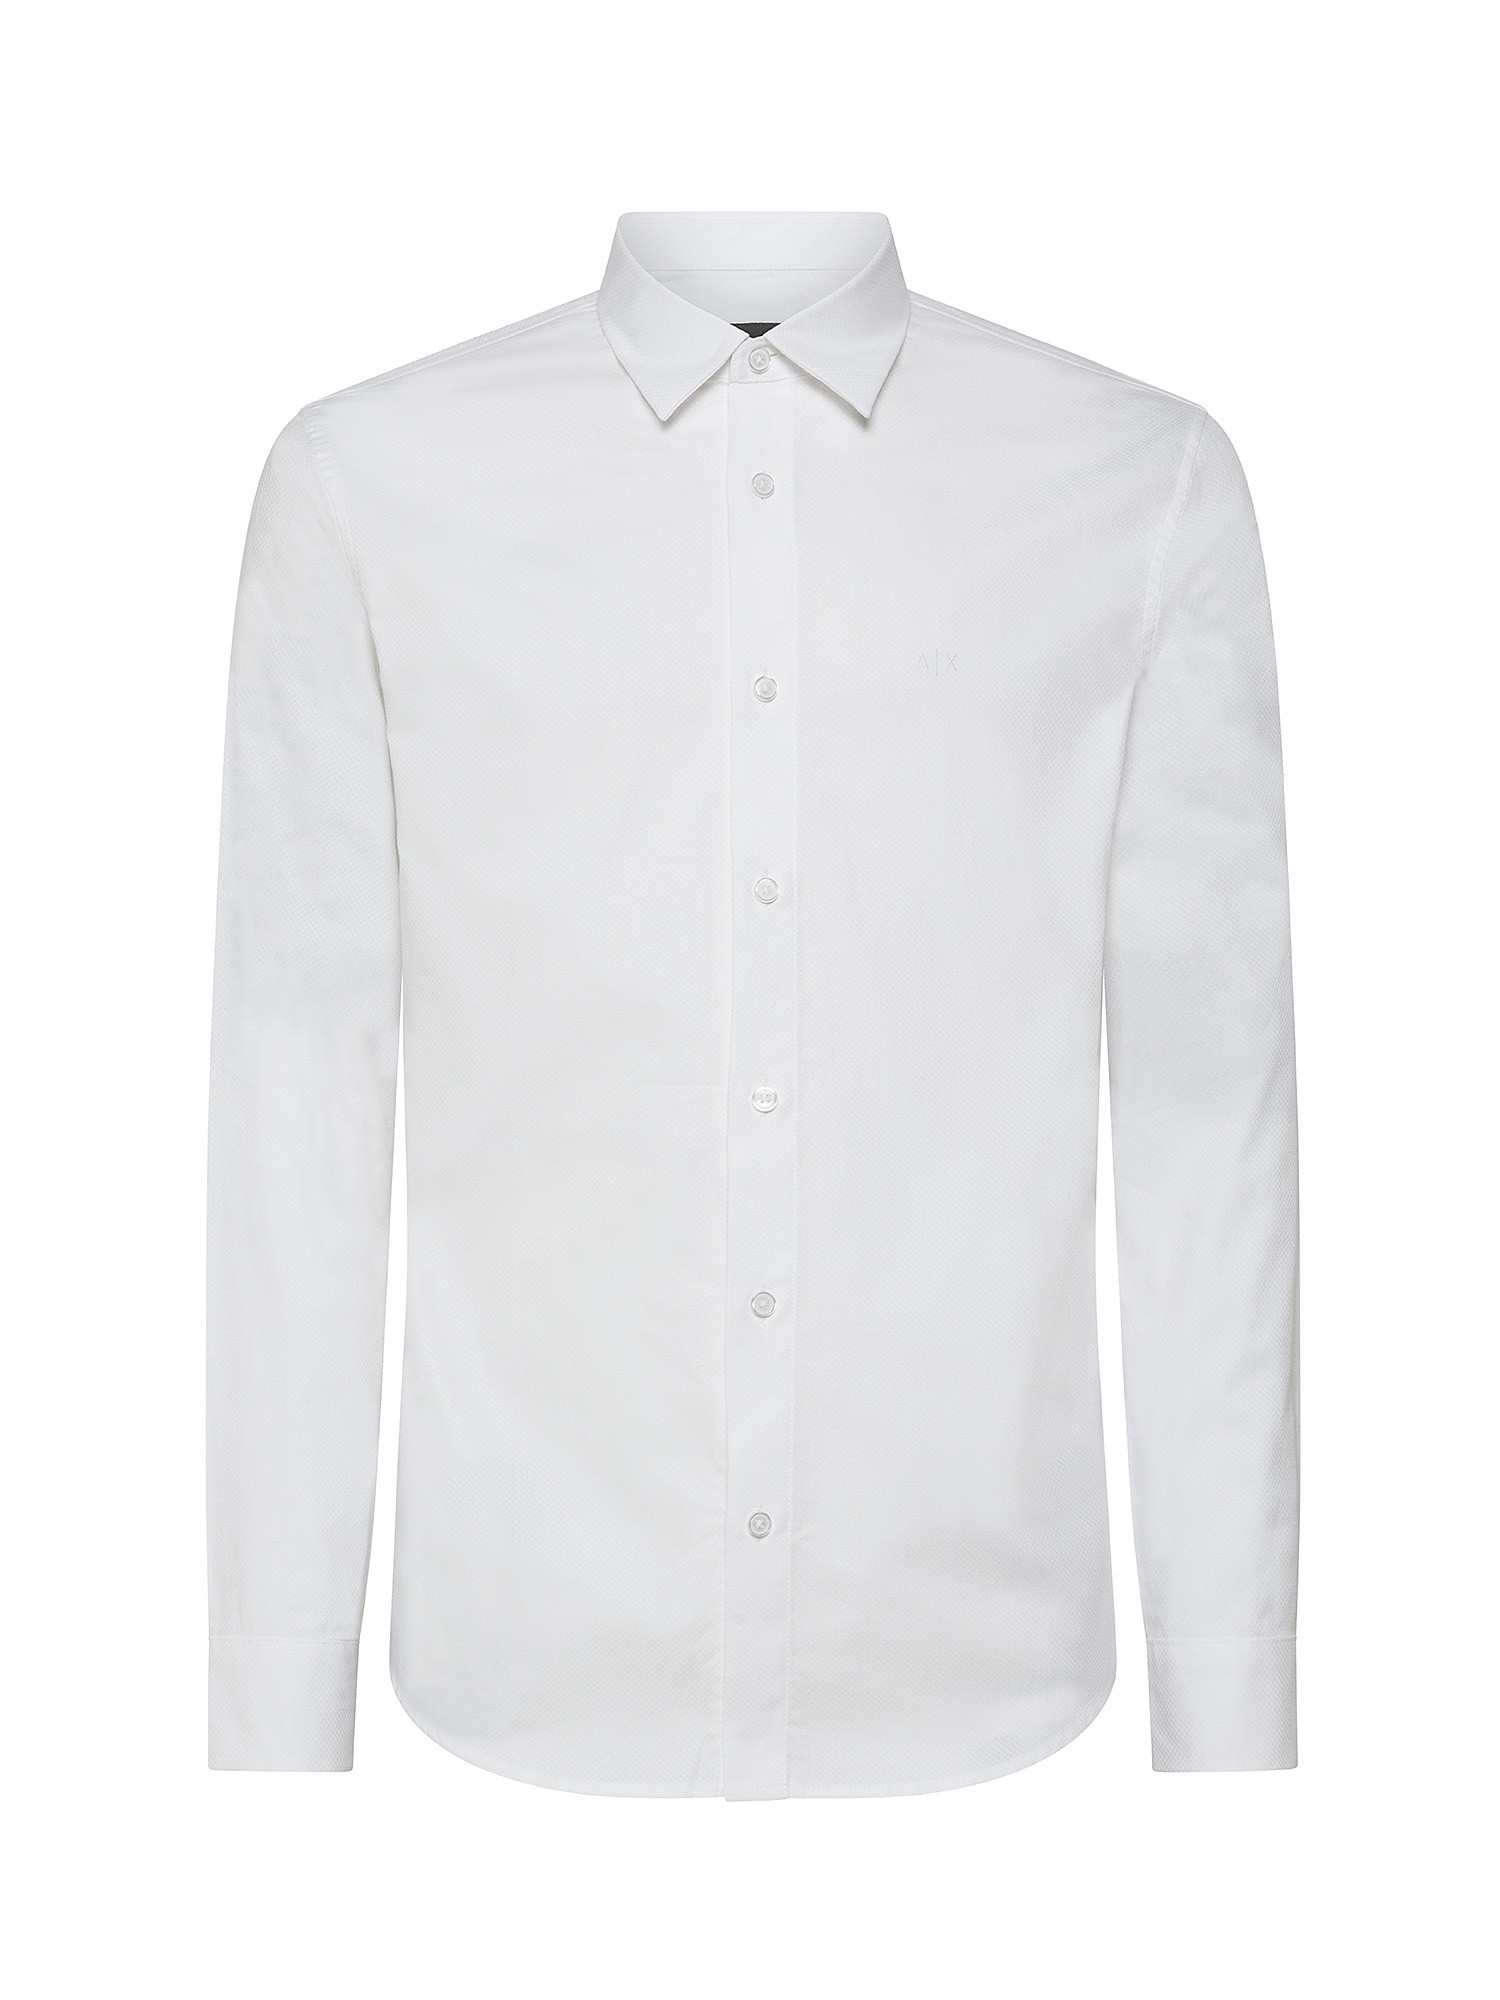 Armani Exchange - Camicia regular fit in cotone, Bianco, large image number 1